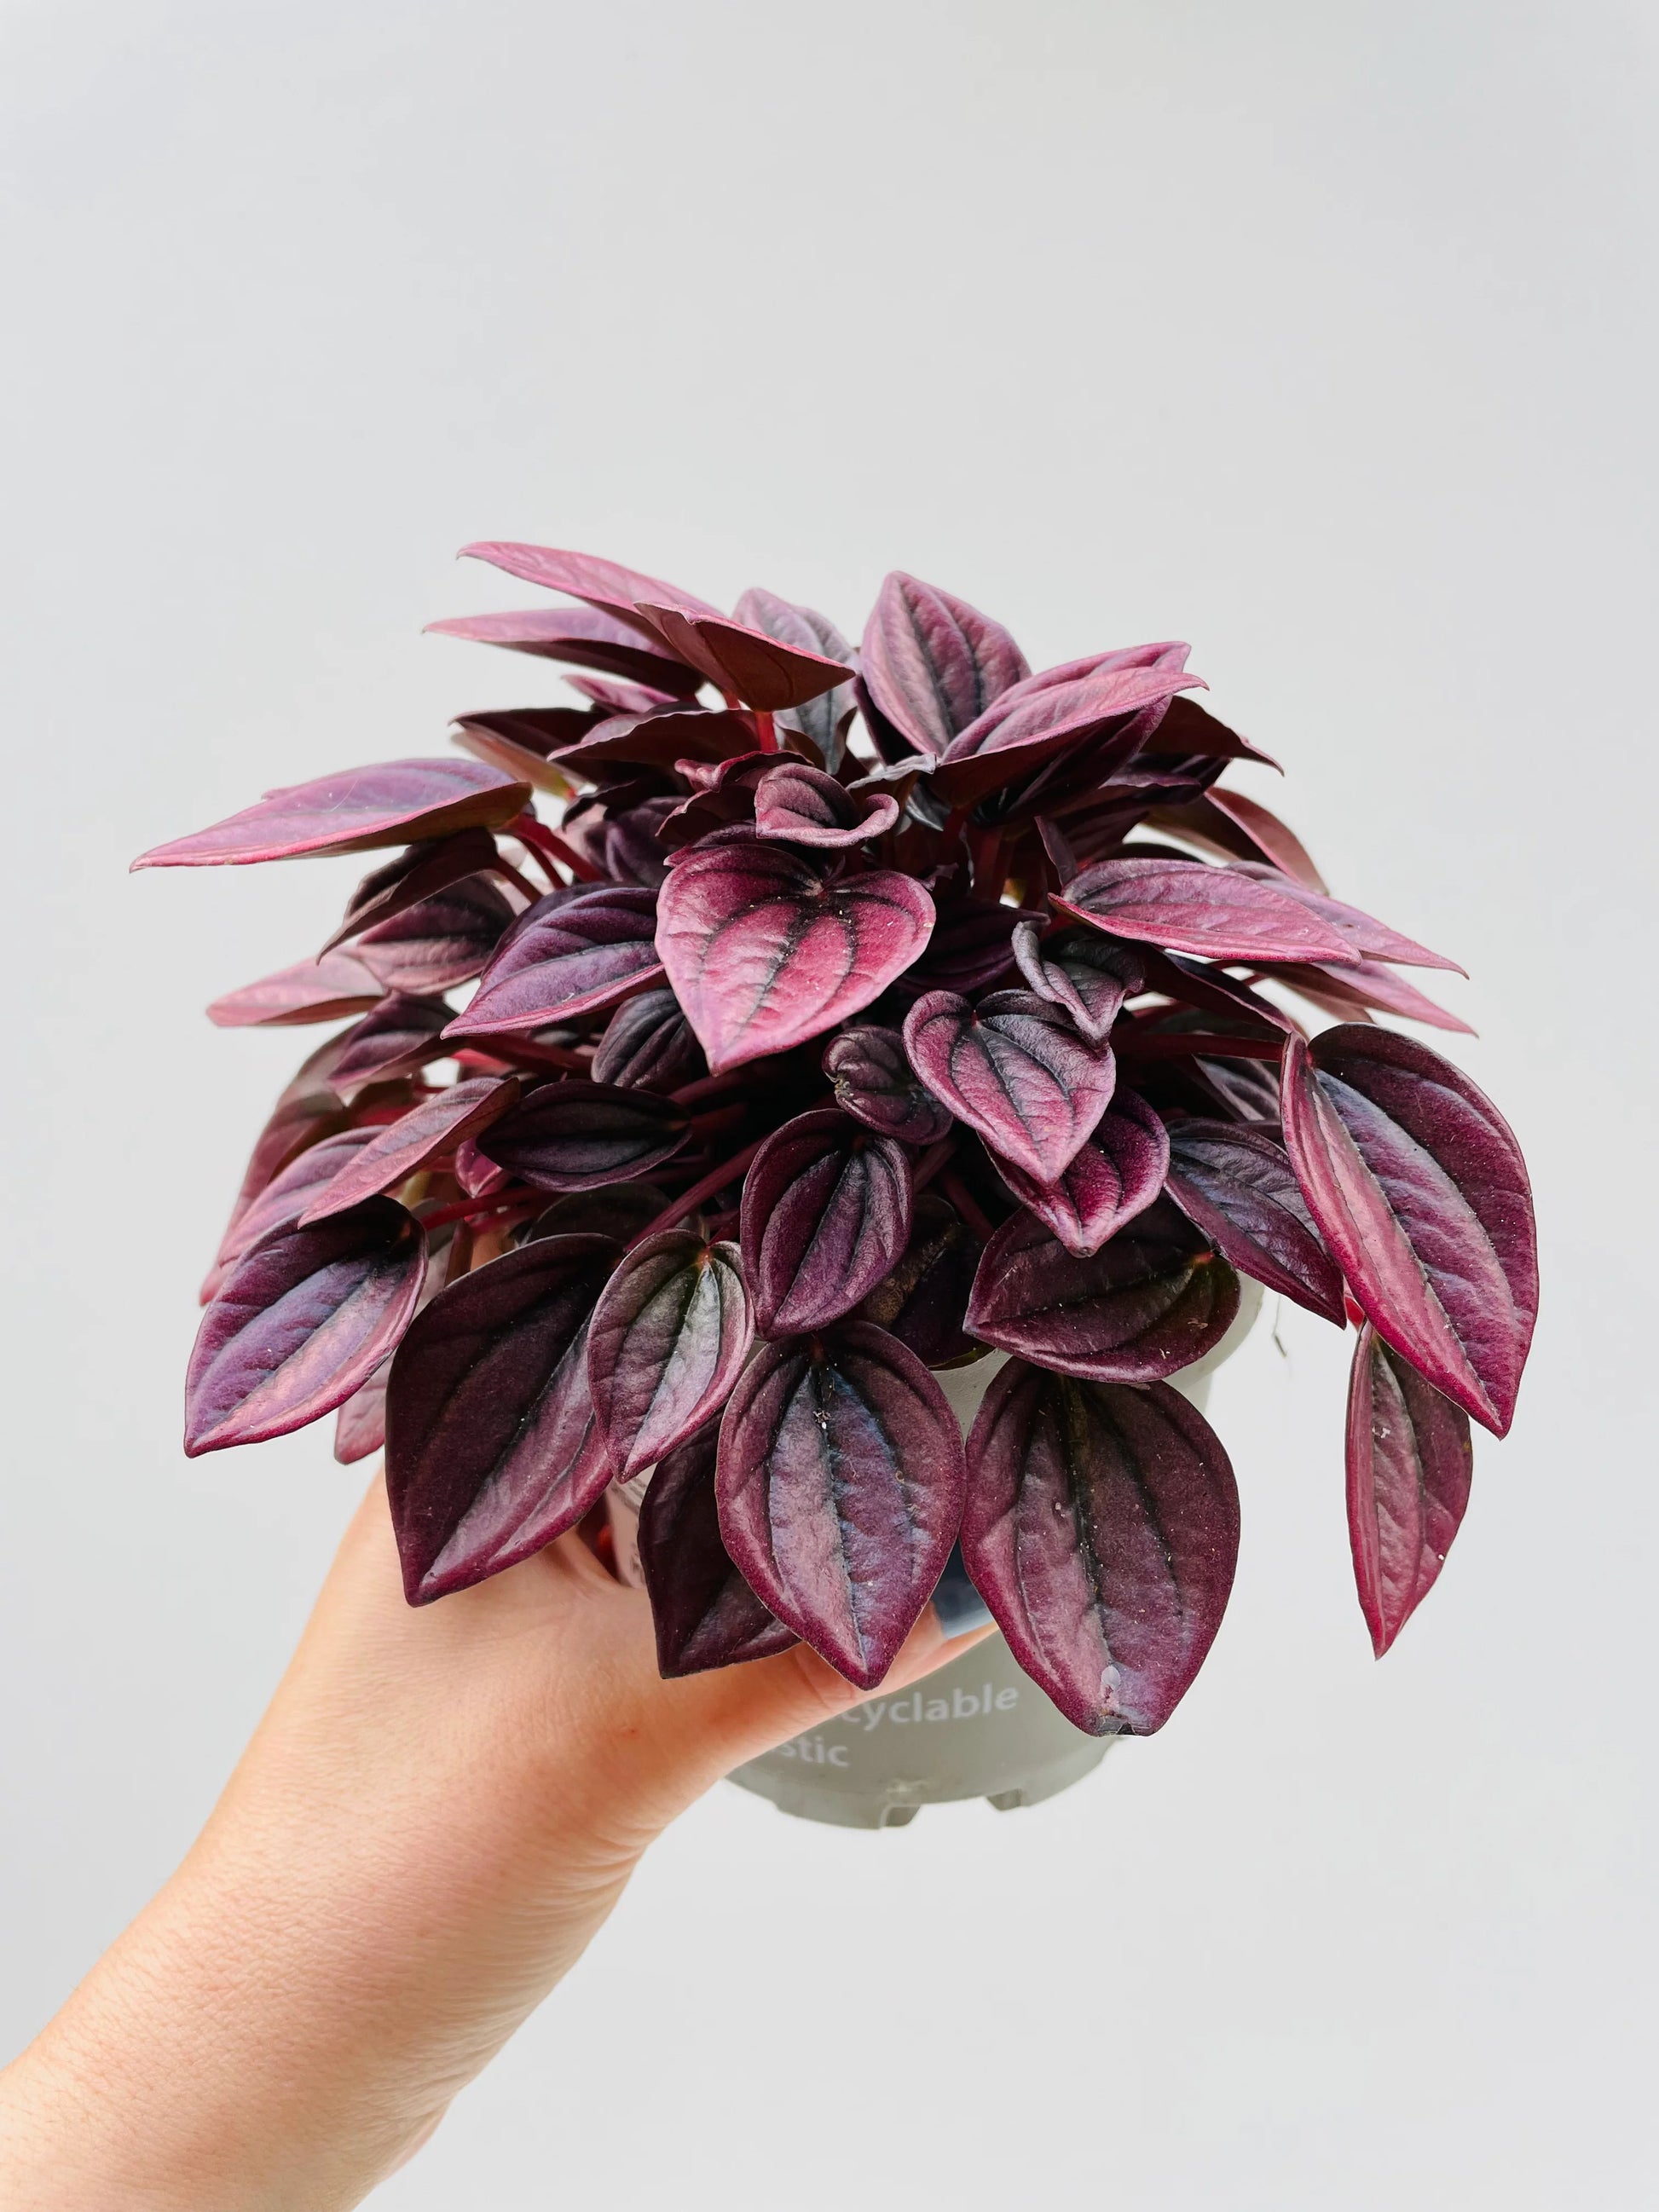 Peperomia Caperata Cayenne showcasing its textured, rippled leaves in deep green hues, displayed indoors.